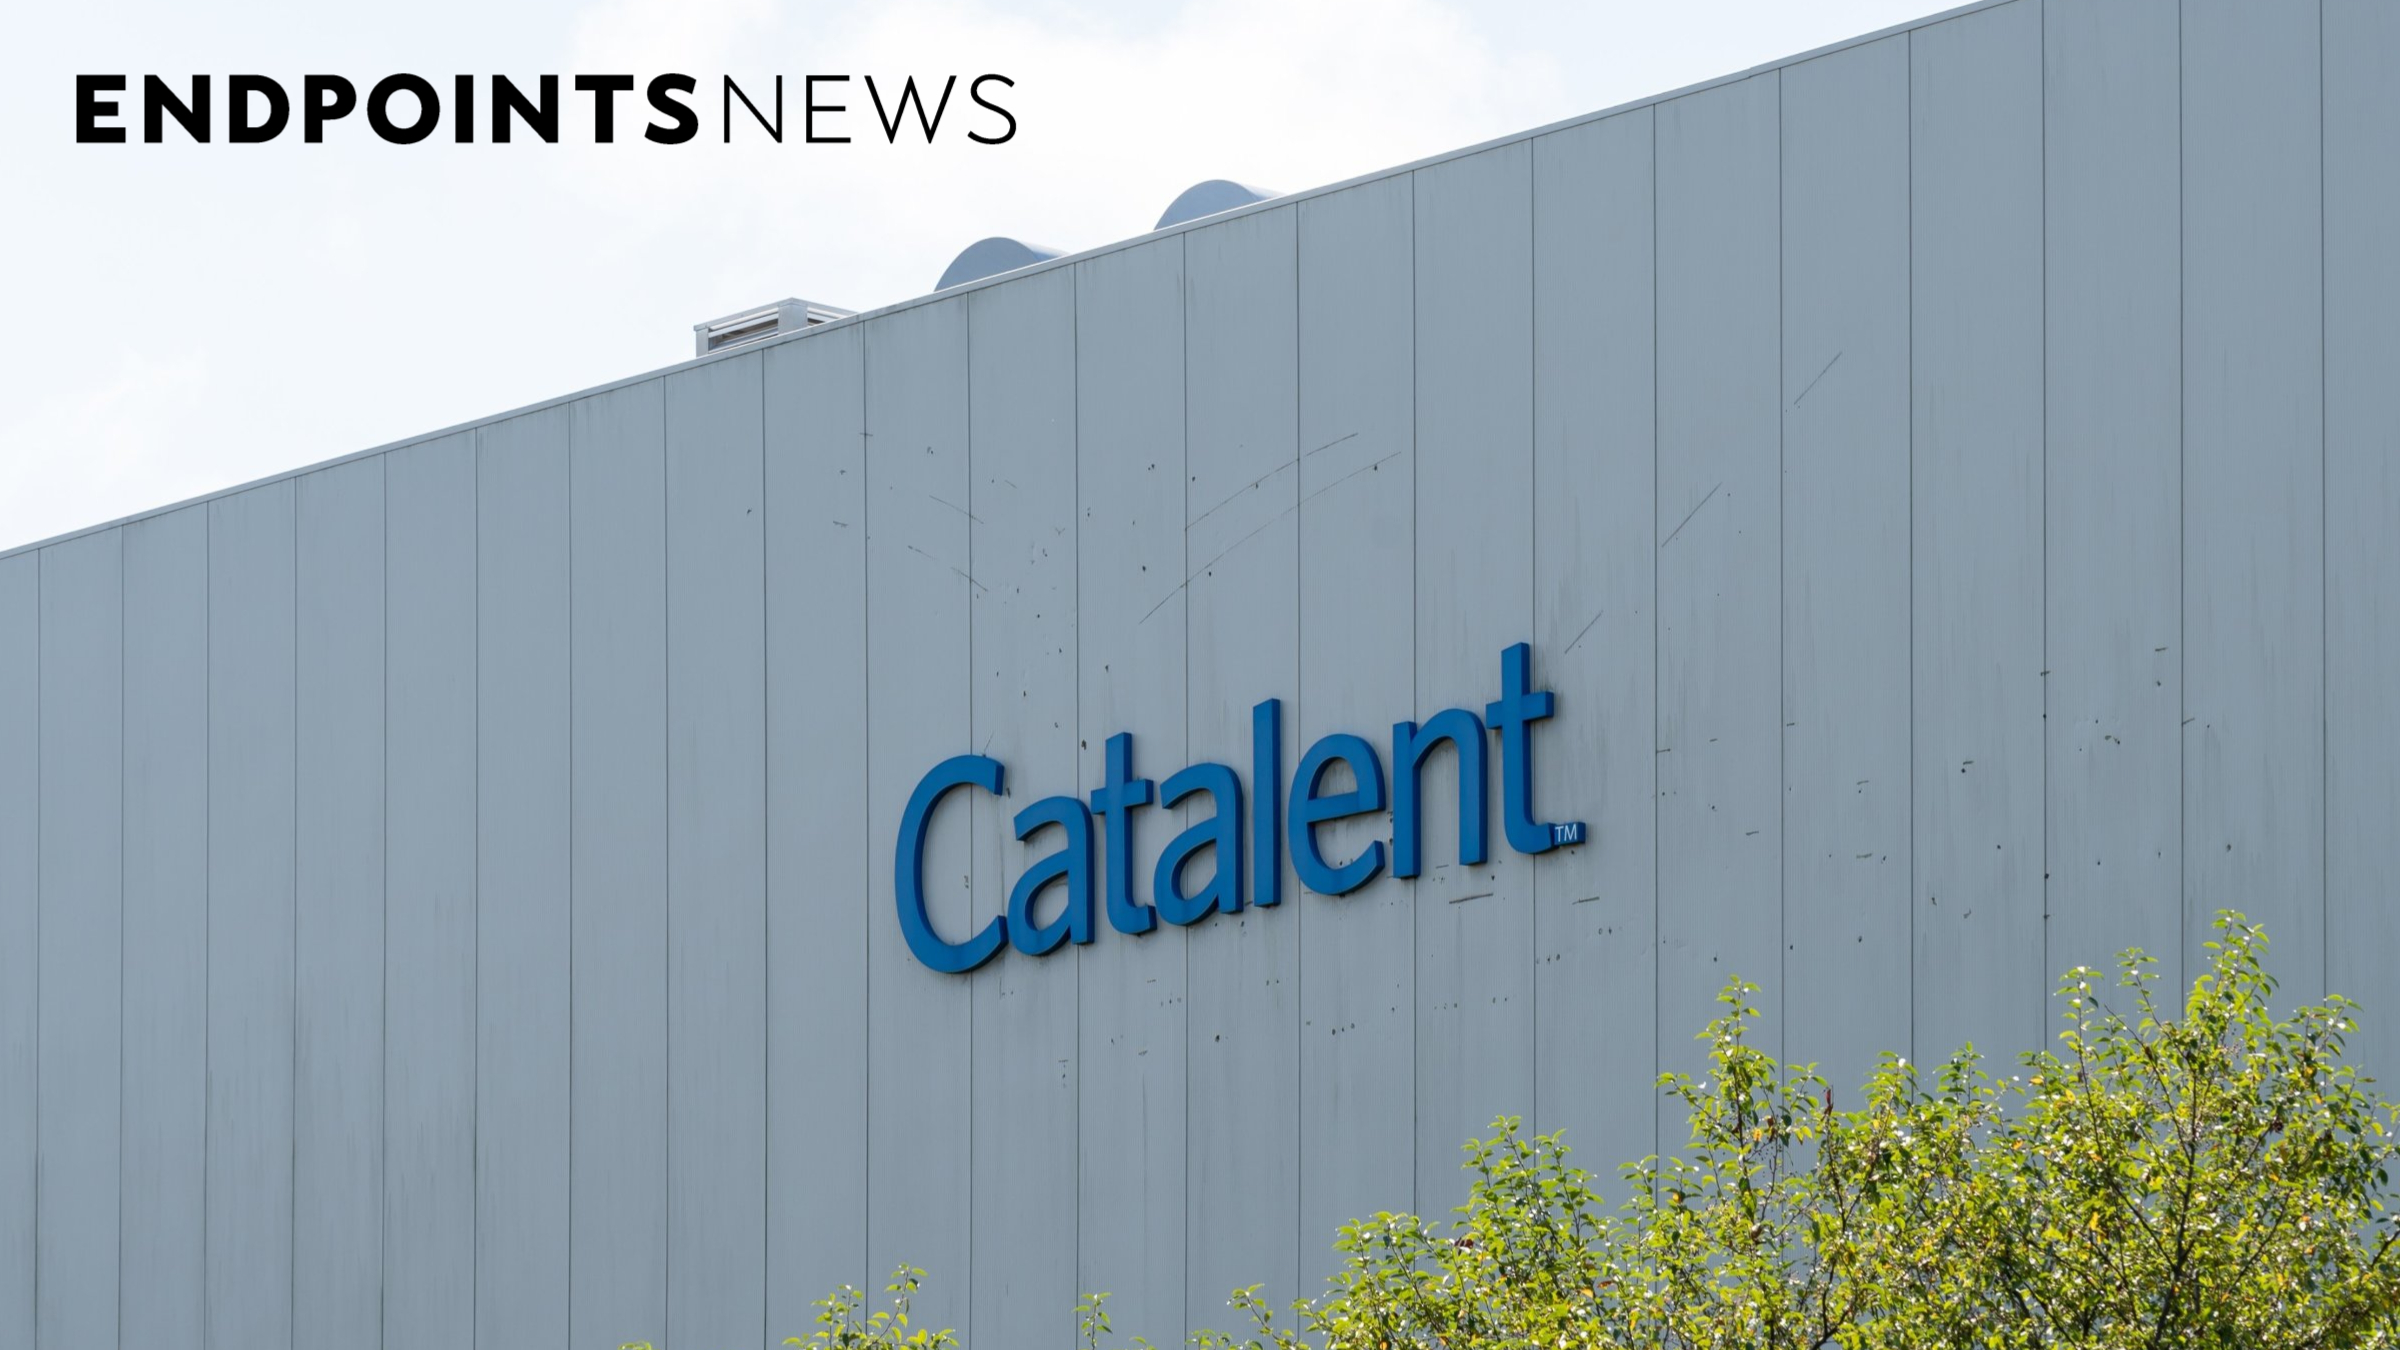 Catalent details revenue downturn, staff cuts as it looks forward to a